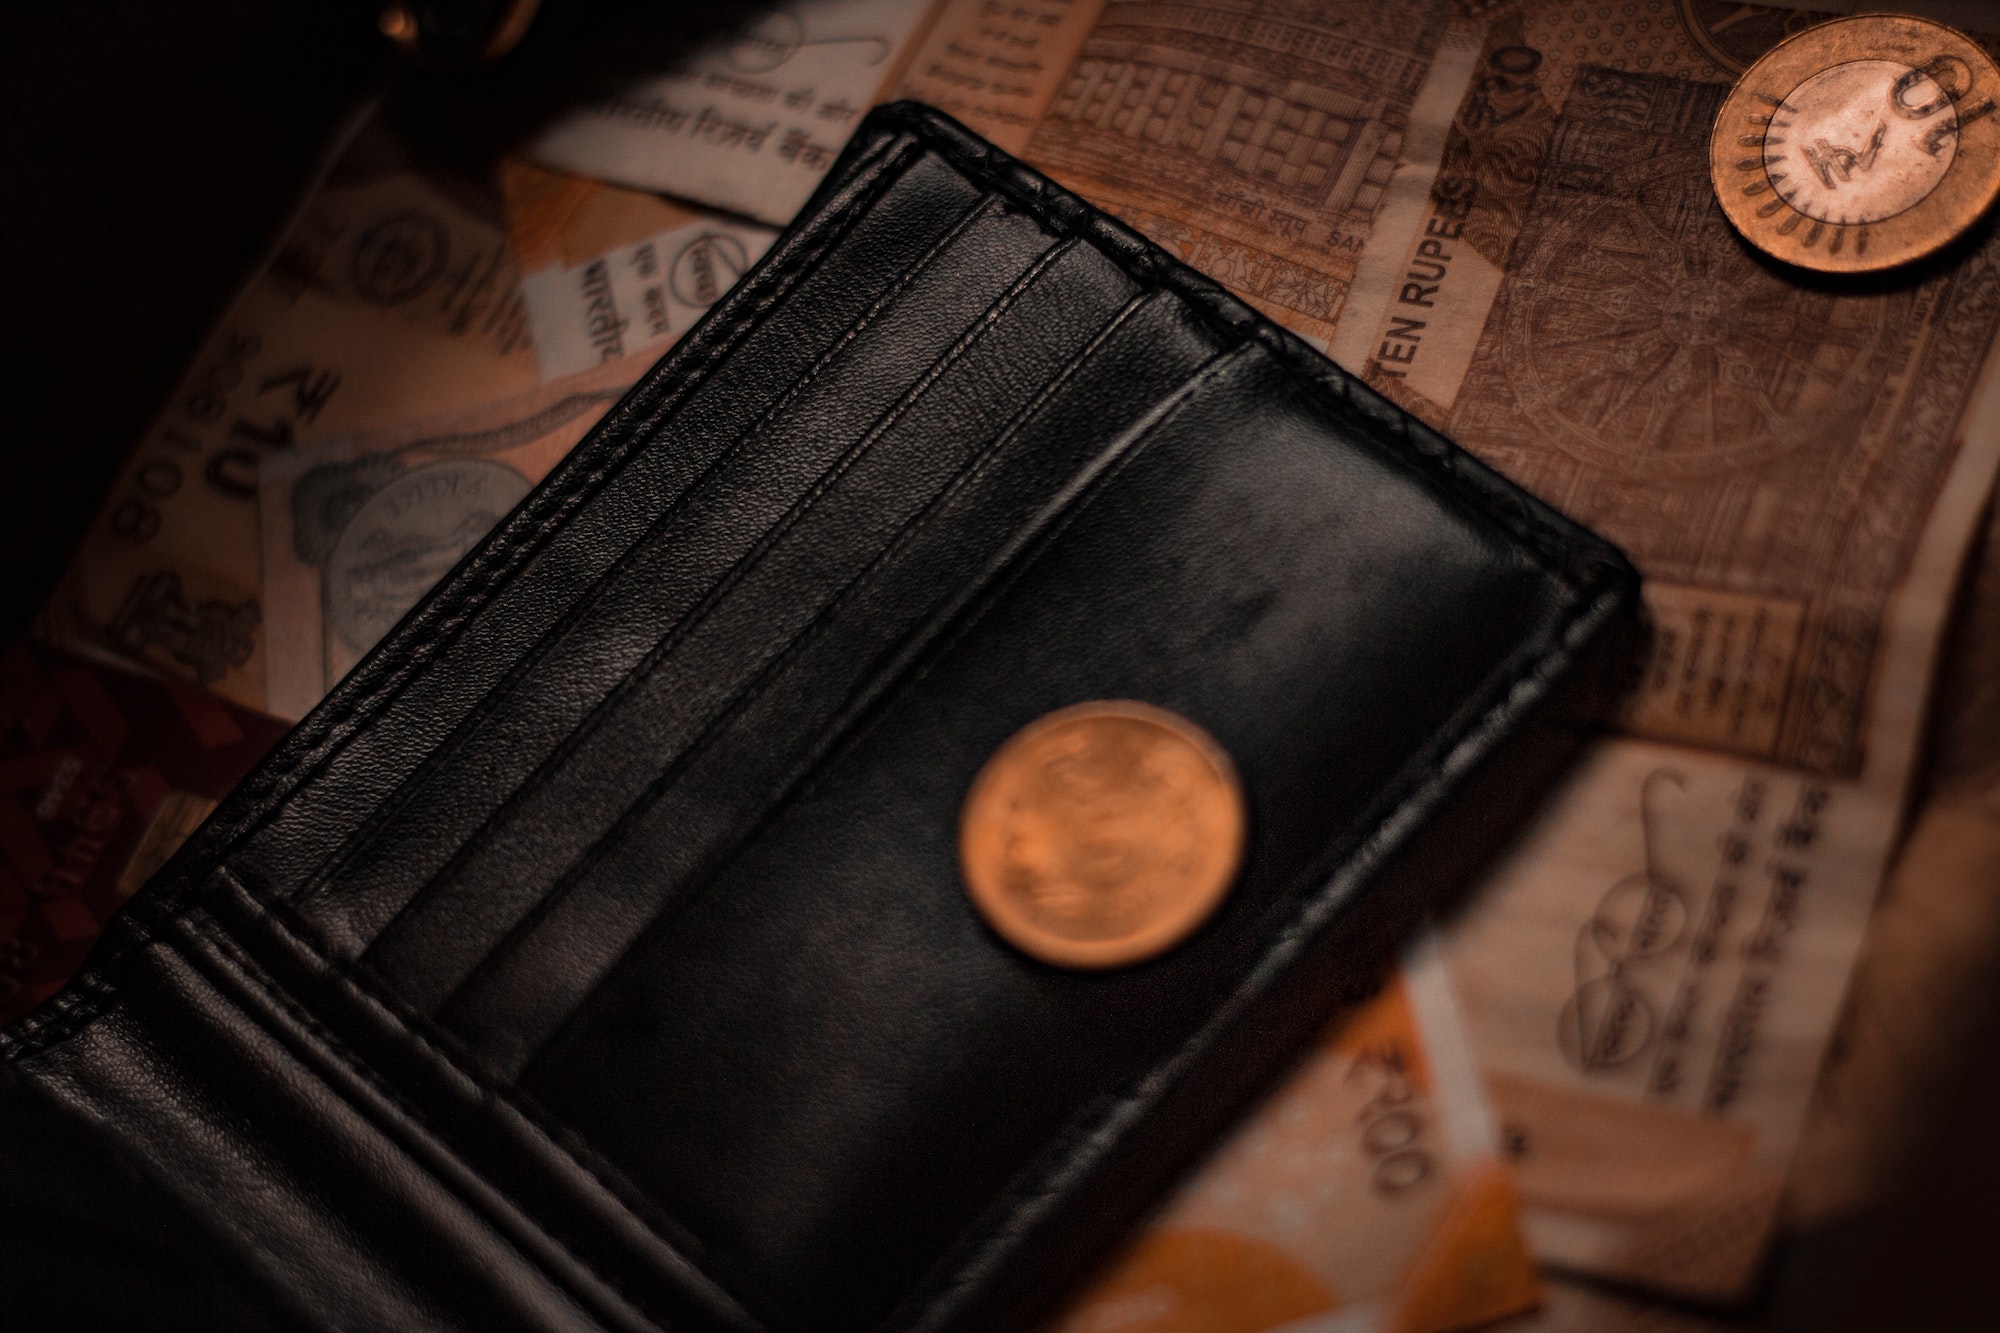 self-hosted bitcoin wallets become front line in fight over crypto regulations - coindesk